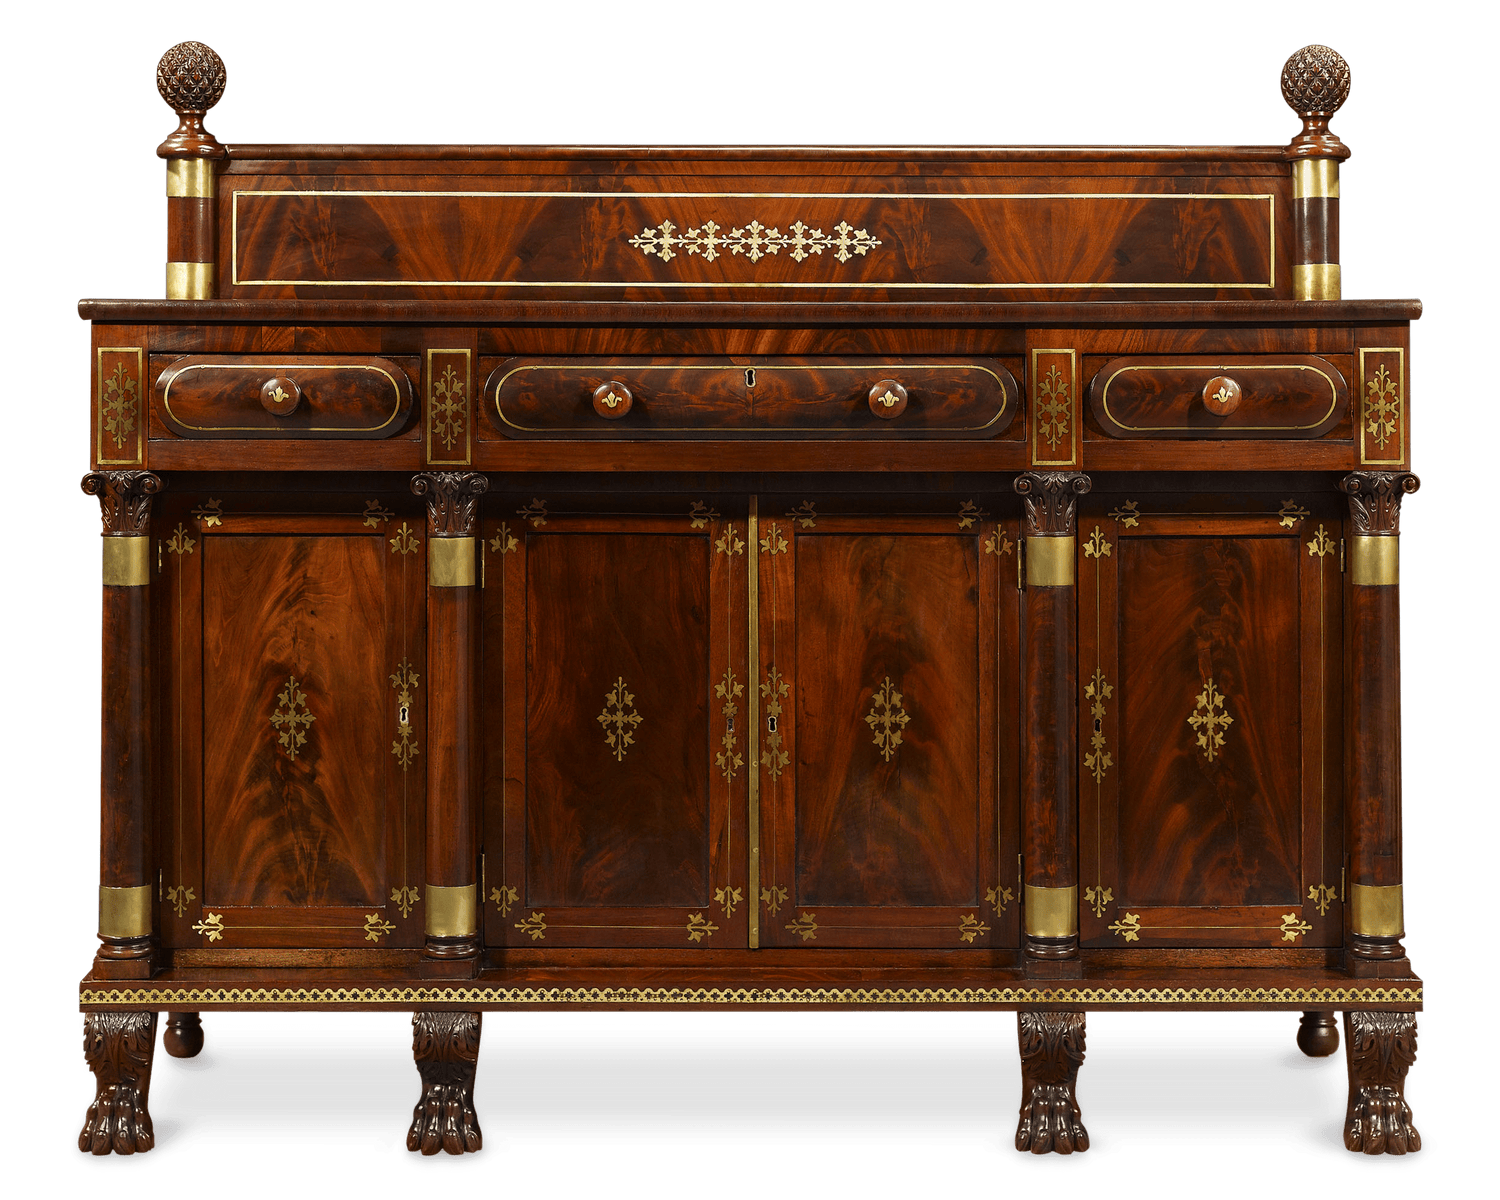 The magnificent set includes a stately and handsome American Federal sideboard